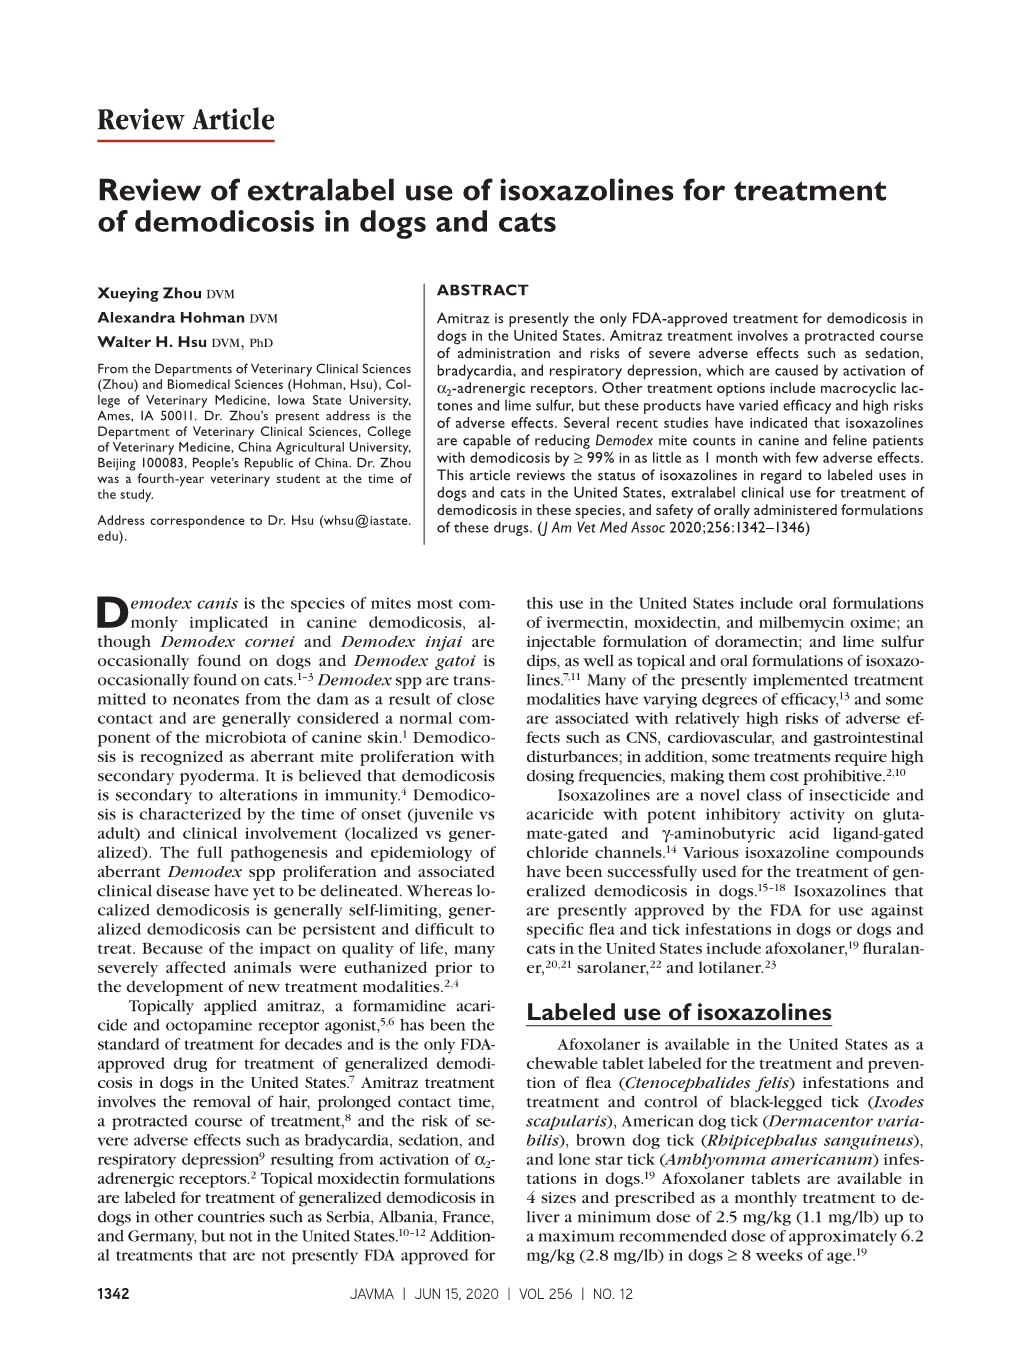 Review of Extralabel Use of Isoxazolines for Treatment of Demodicosis in Dogs and Cats Review Article